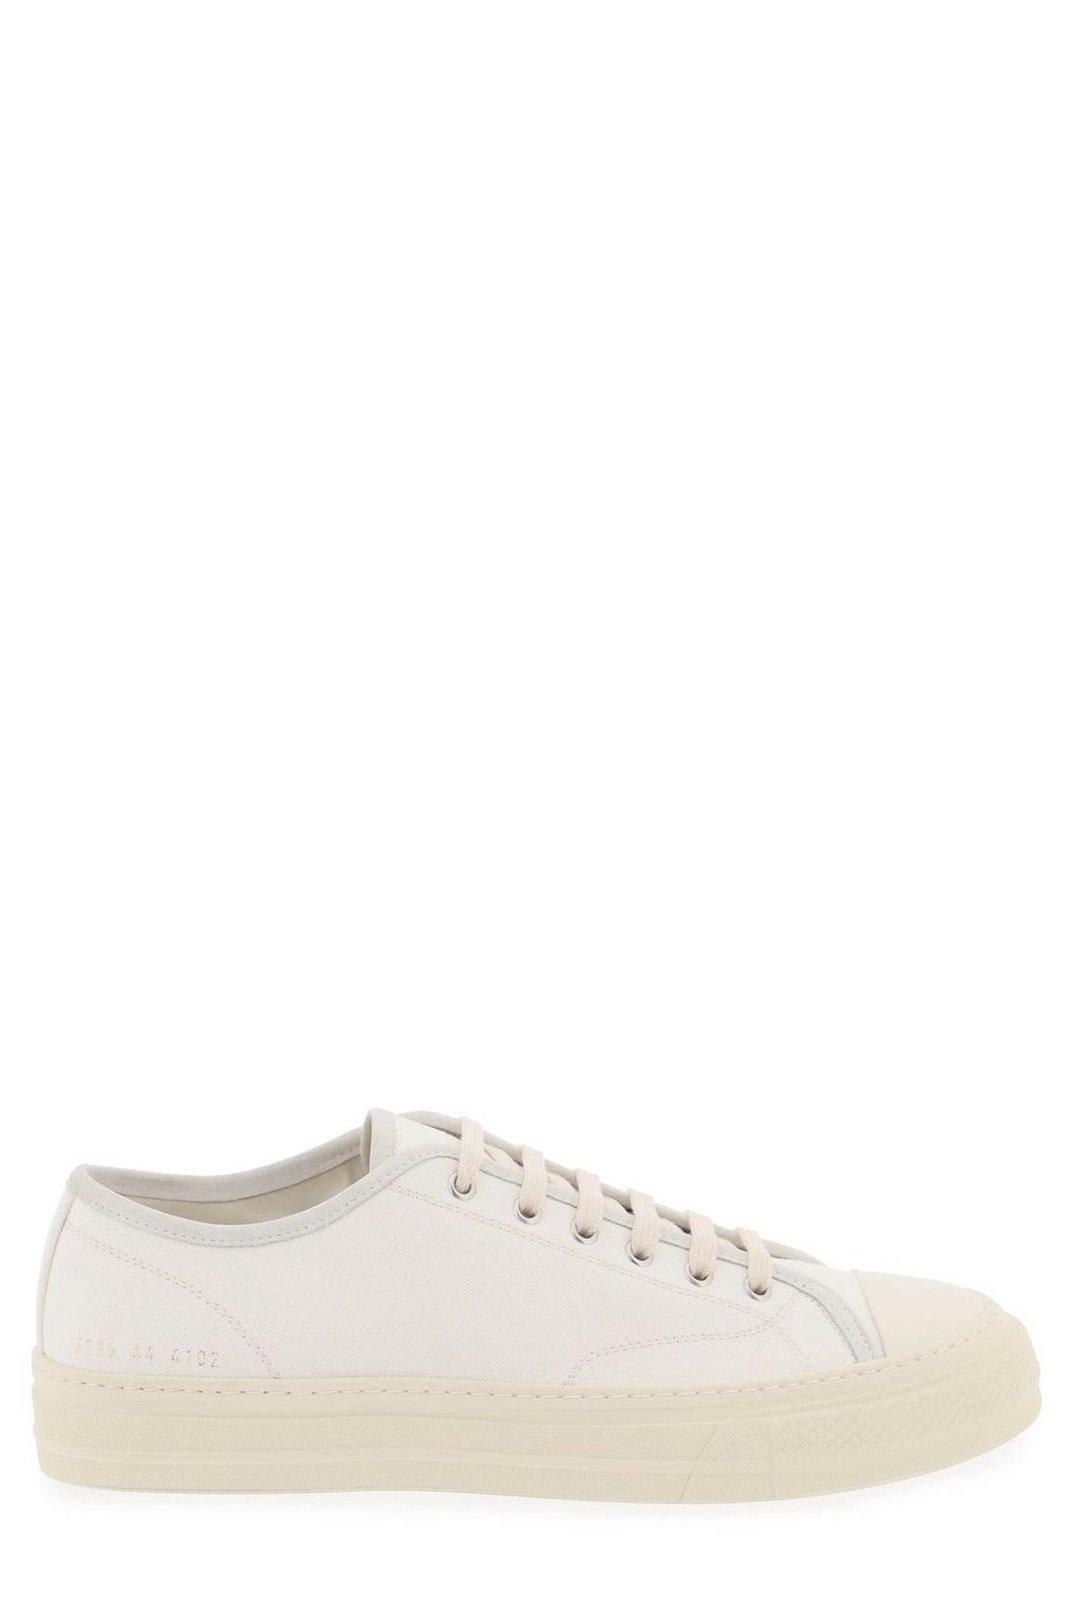 Common Projects Tournament Round Toe Sneakers